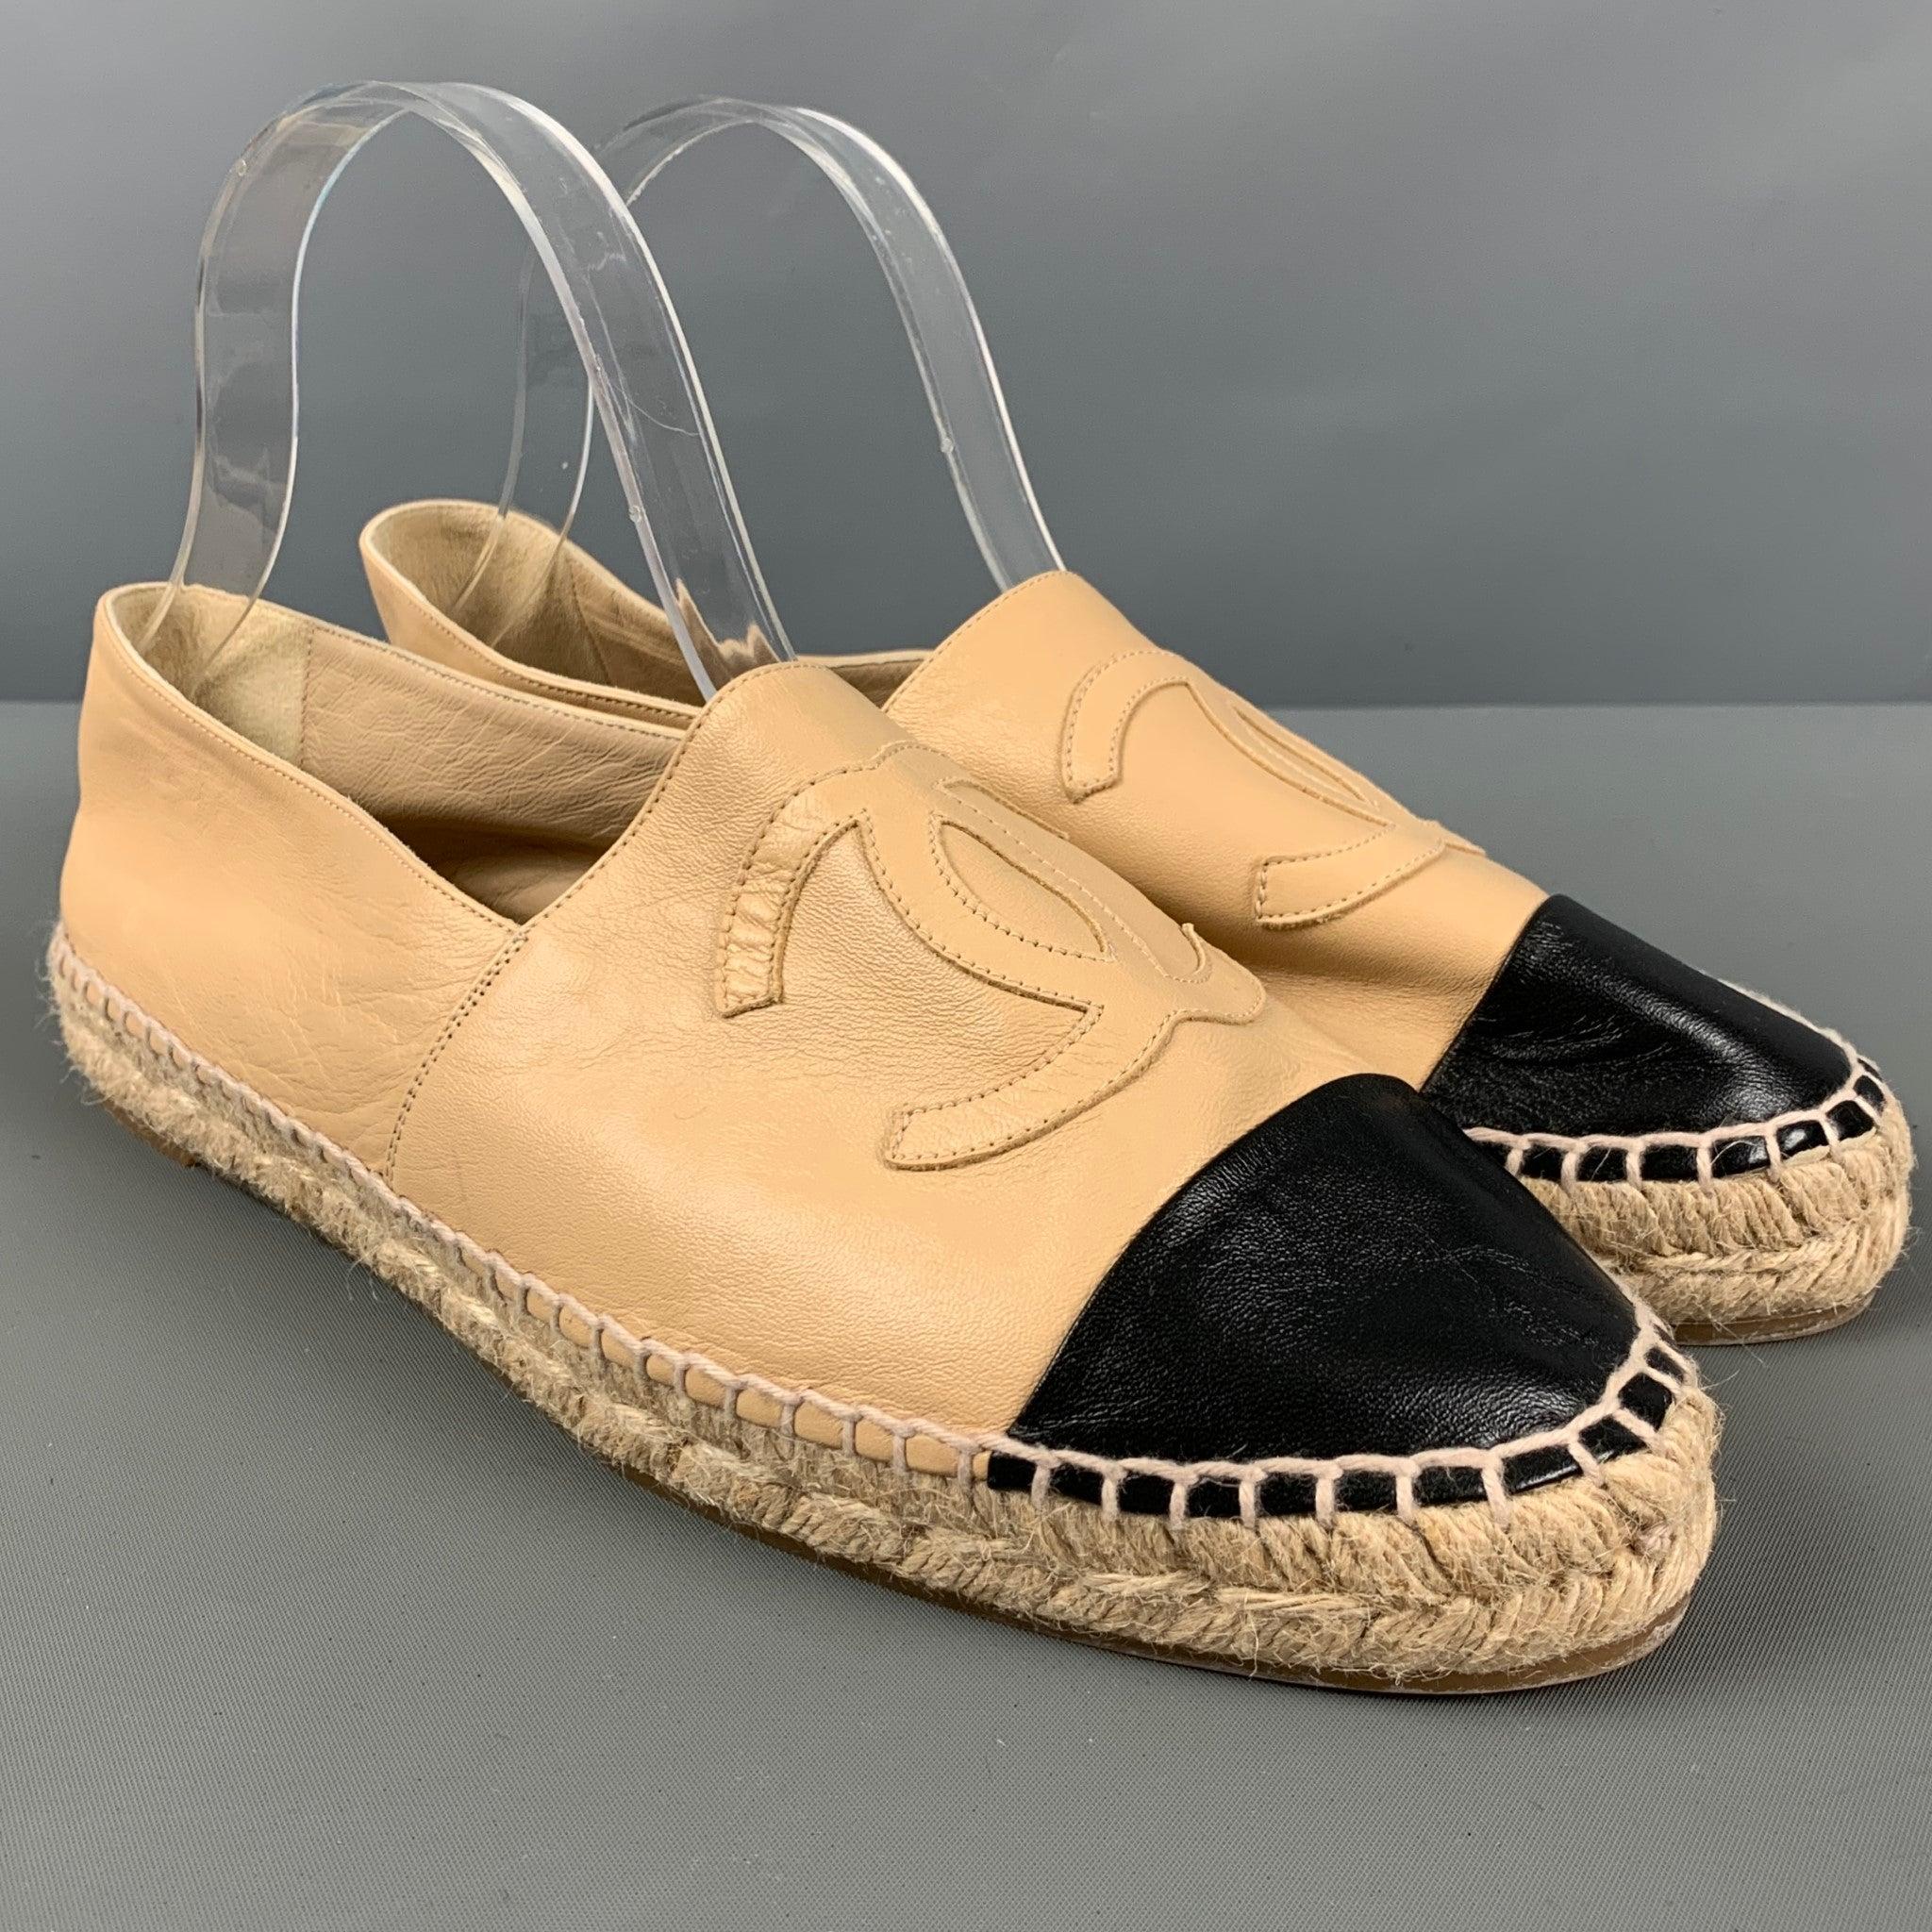 CHANEL flats
in a beige lambskin leather featuring signature logo, black contrast cap toe, and an espadrille sole.New without box. 

Marked:   M G29762Outsole:10.75 inches  x 3.5 inches 
  
  
 
Reference: 126612
Category: Flats
More Details
   